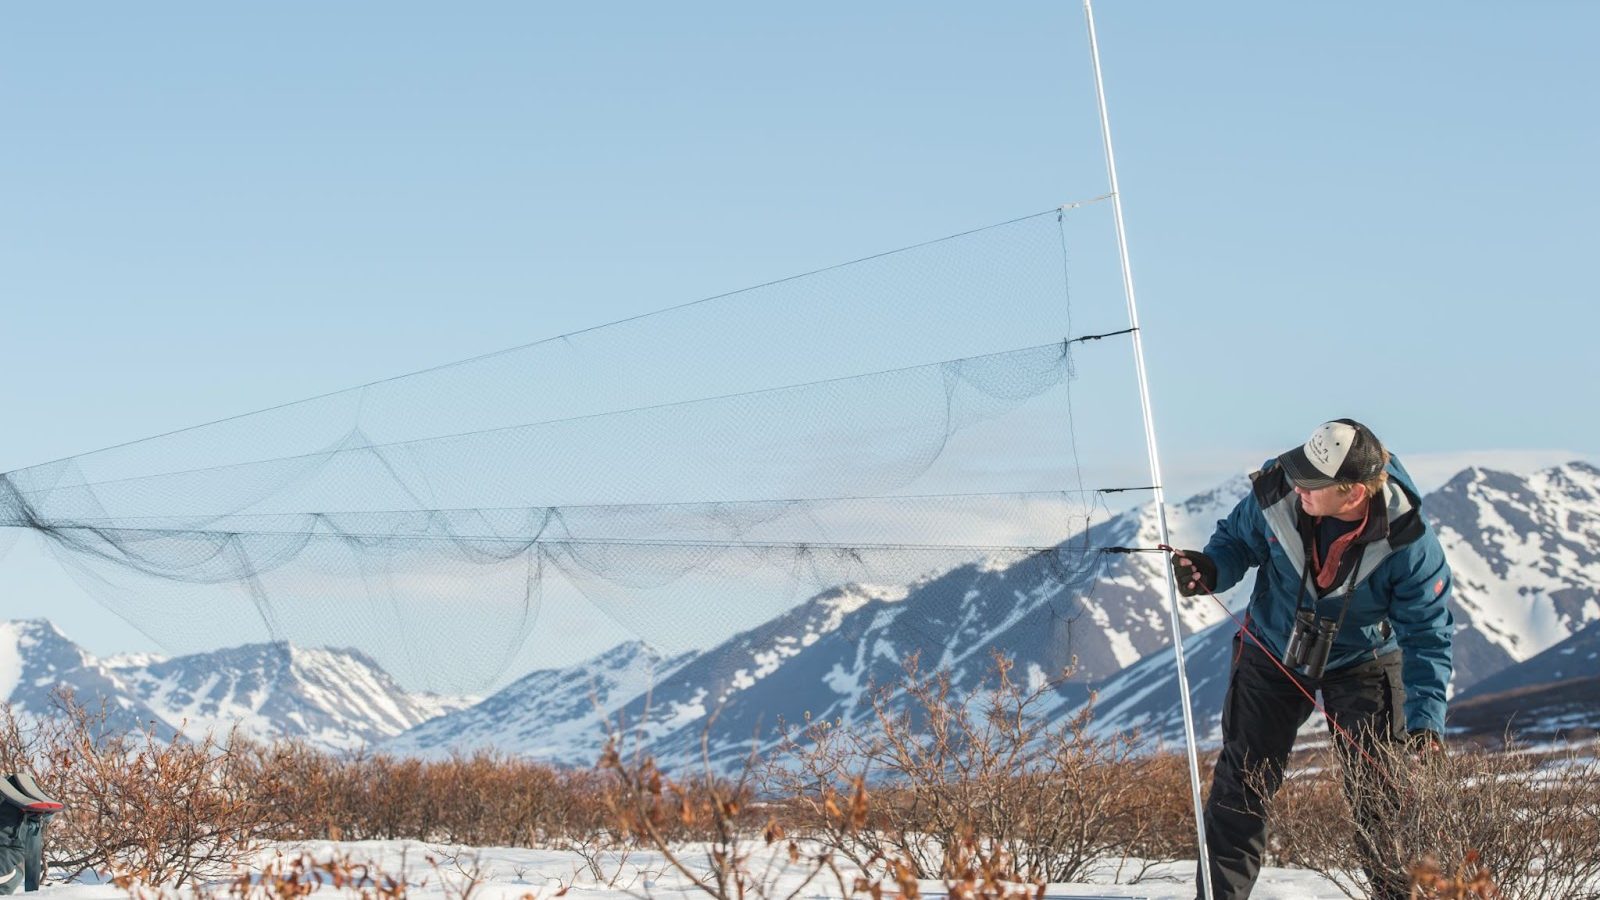 Pete Marra sets up bird nets in front of mountains